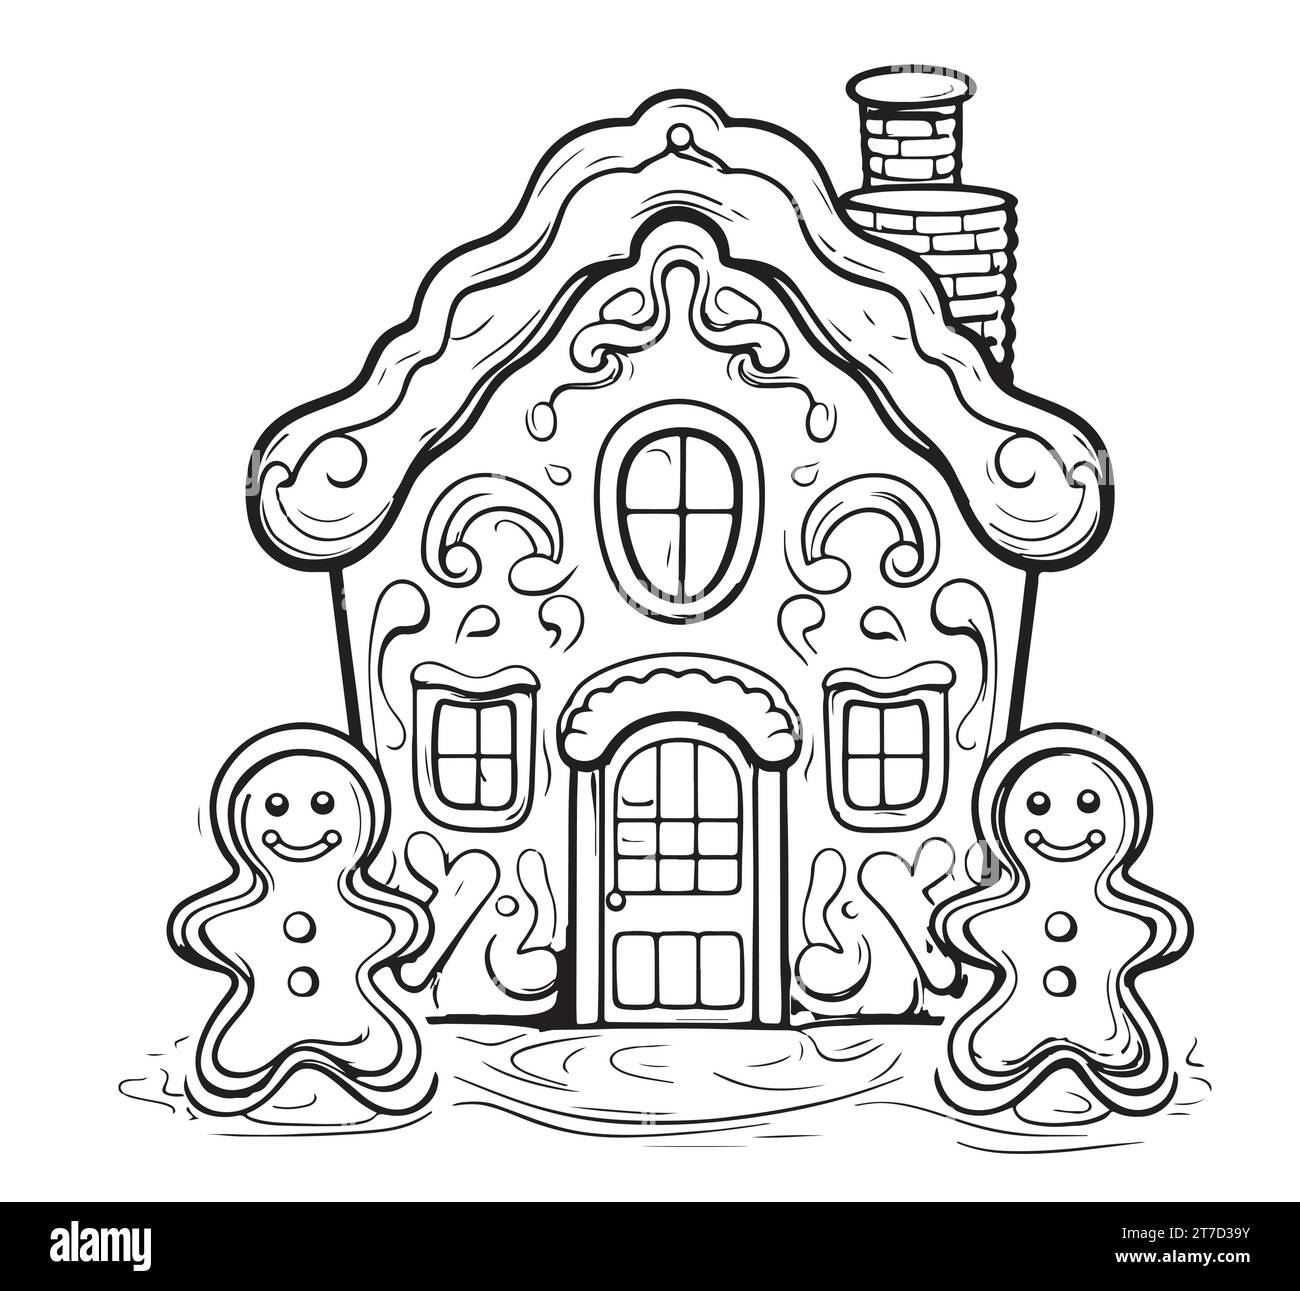 Coloring pages of gingerbread houses. Outline vector illustration for children activity. Christmas black and white images, ready for print. Stock Vector